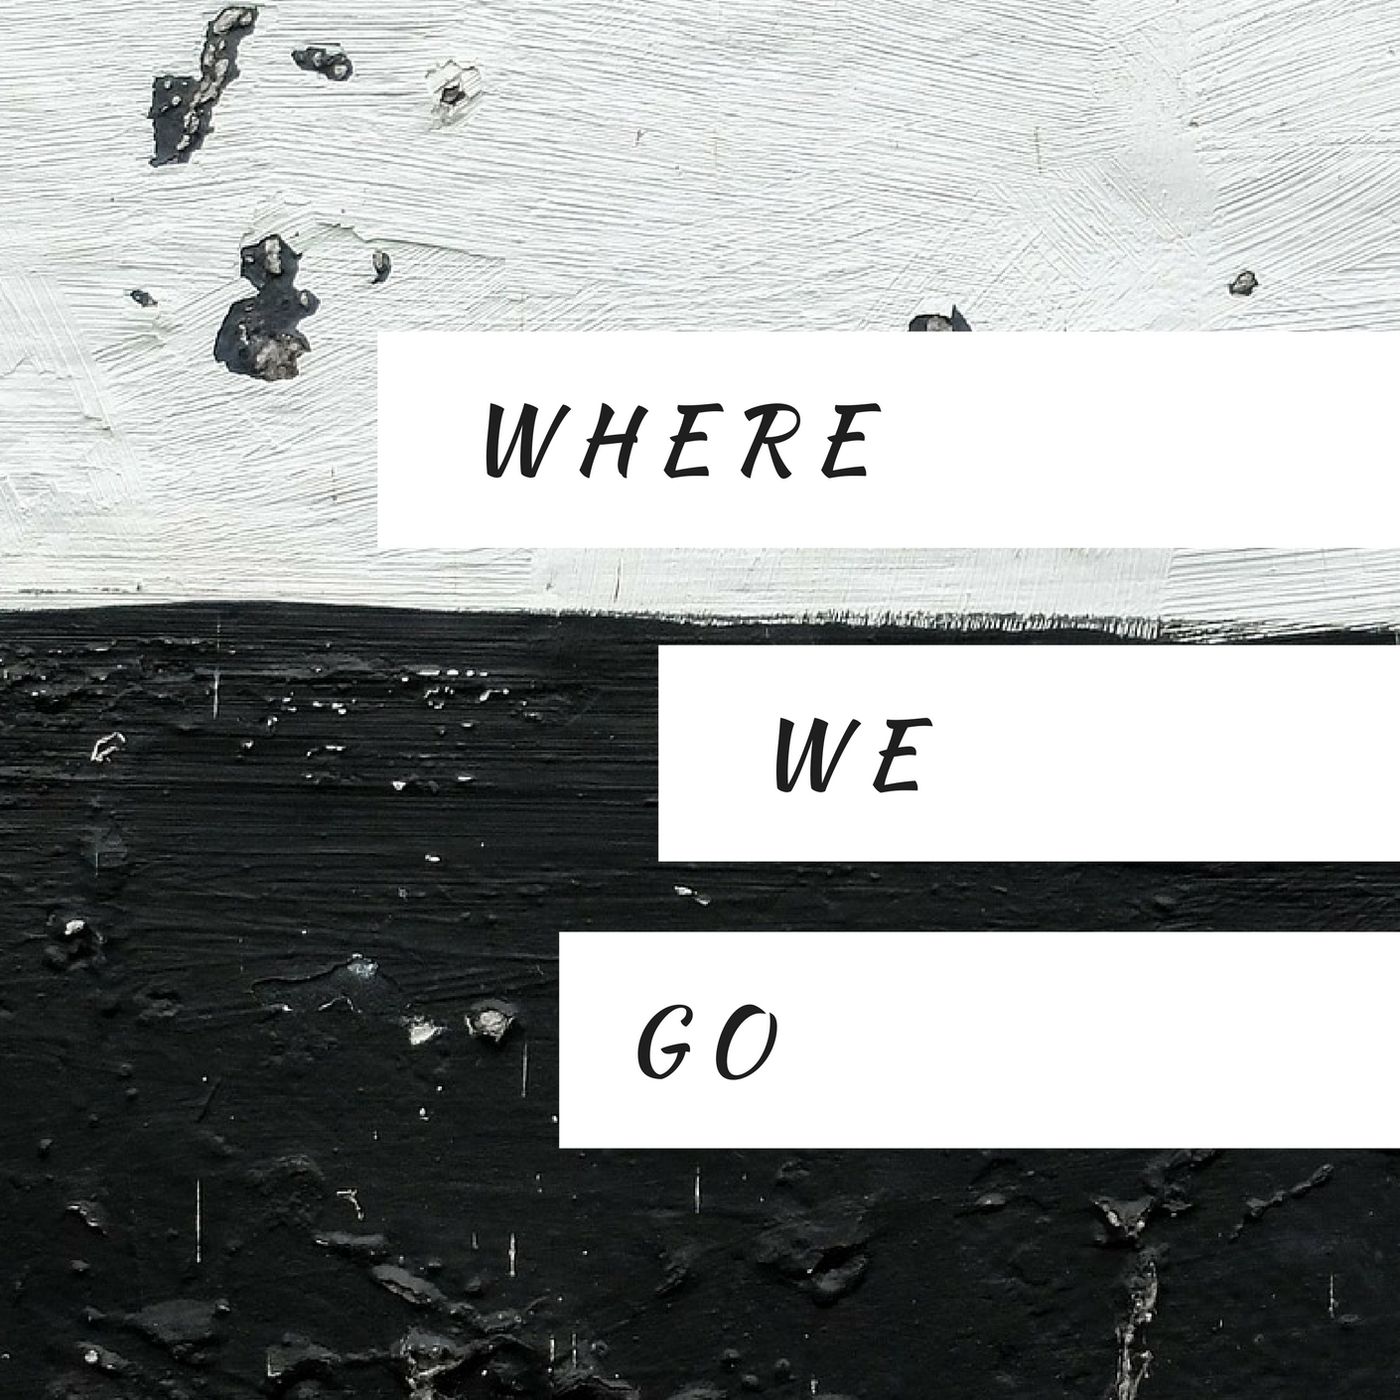 Ep. 1: Reminiscence of Where We Go